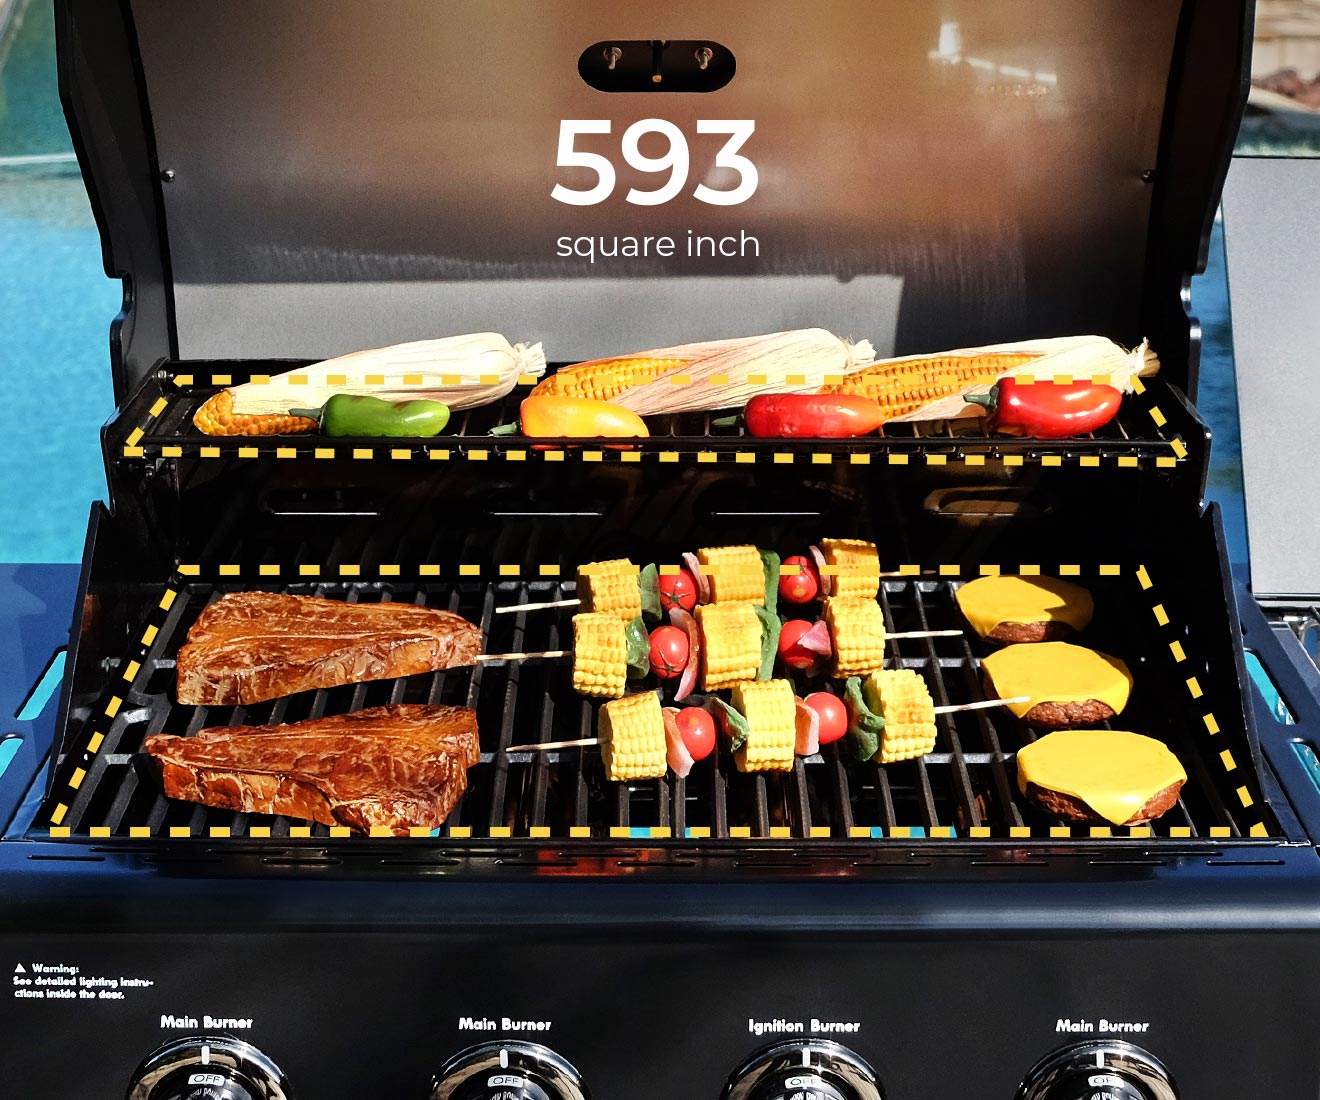 Kenmore 4-Burner Gas Grill with Side Searing Burner Barbecue Barbeque BBQ Grill for Outdoor Outside Cooking PG-40409S0LB-1 in Black with Chrome Accents 593 Square Inches of Grilling Surface